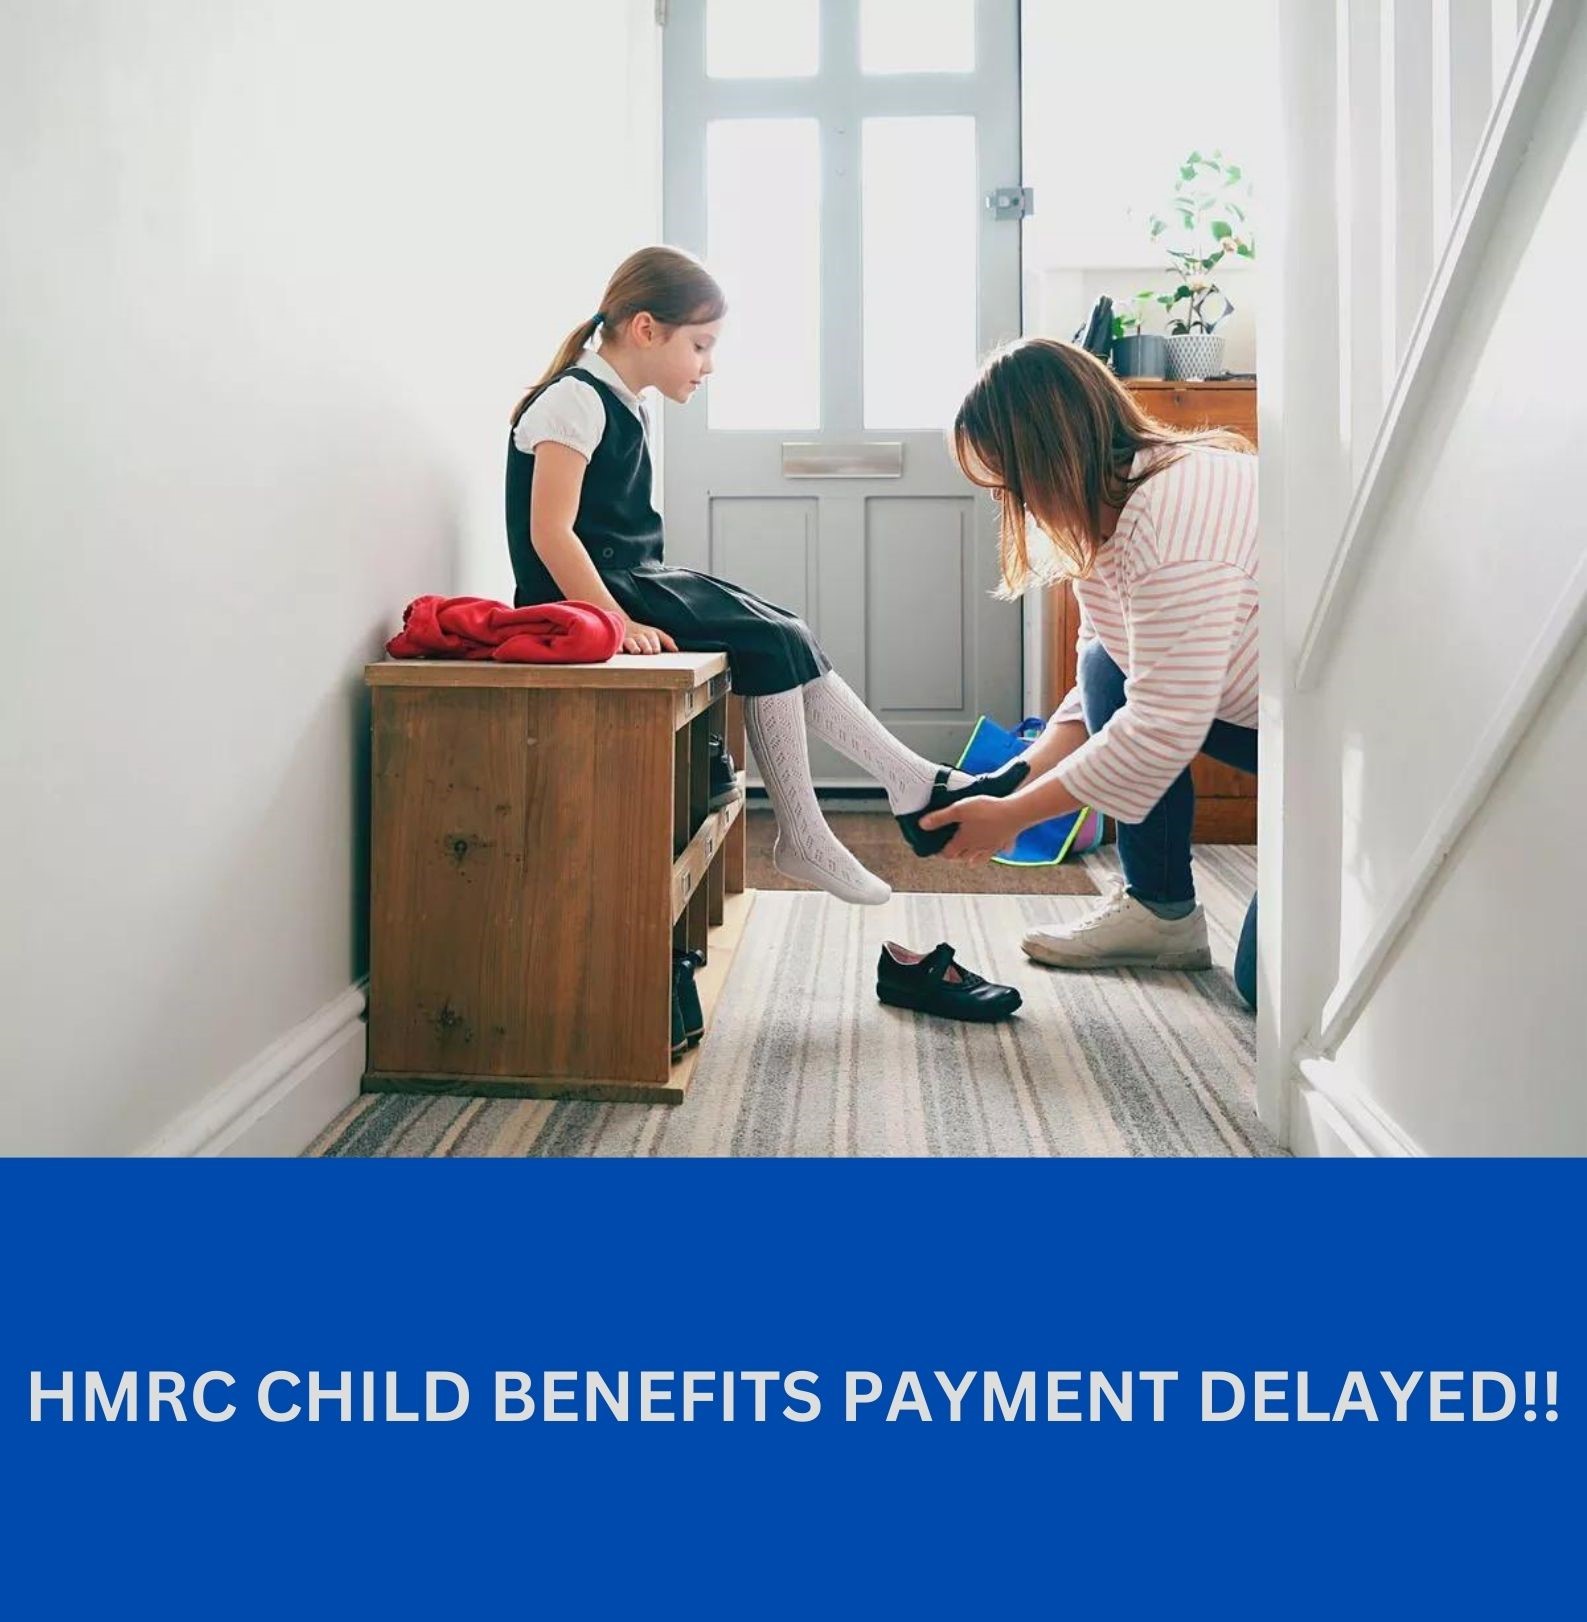 HMRC Child Benefit Payments: Payout Delay, Updates on Application Process, Benefits, and Eligibility